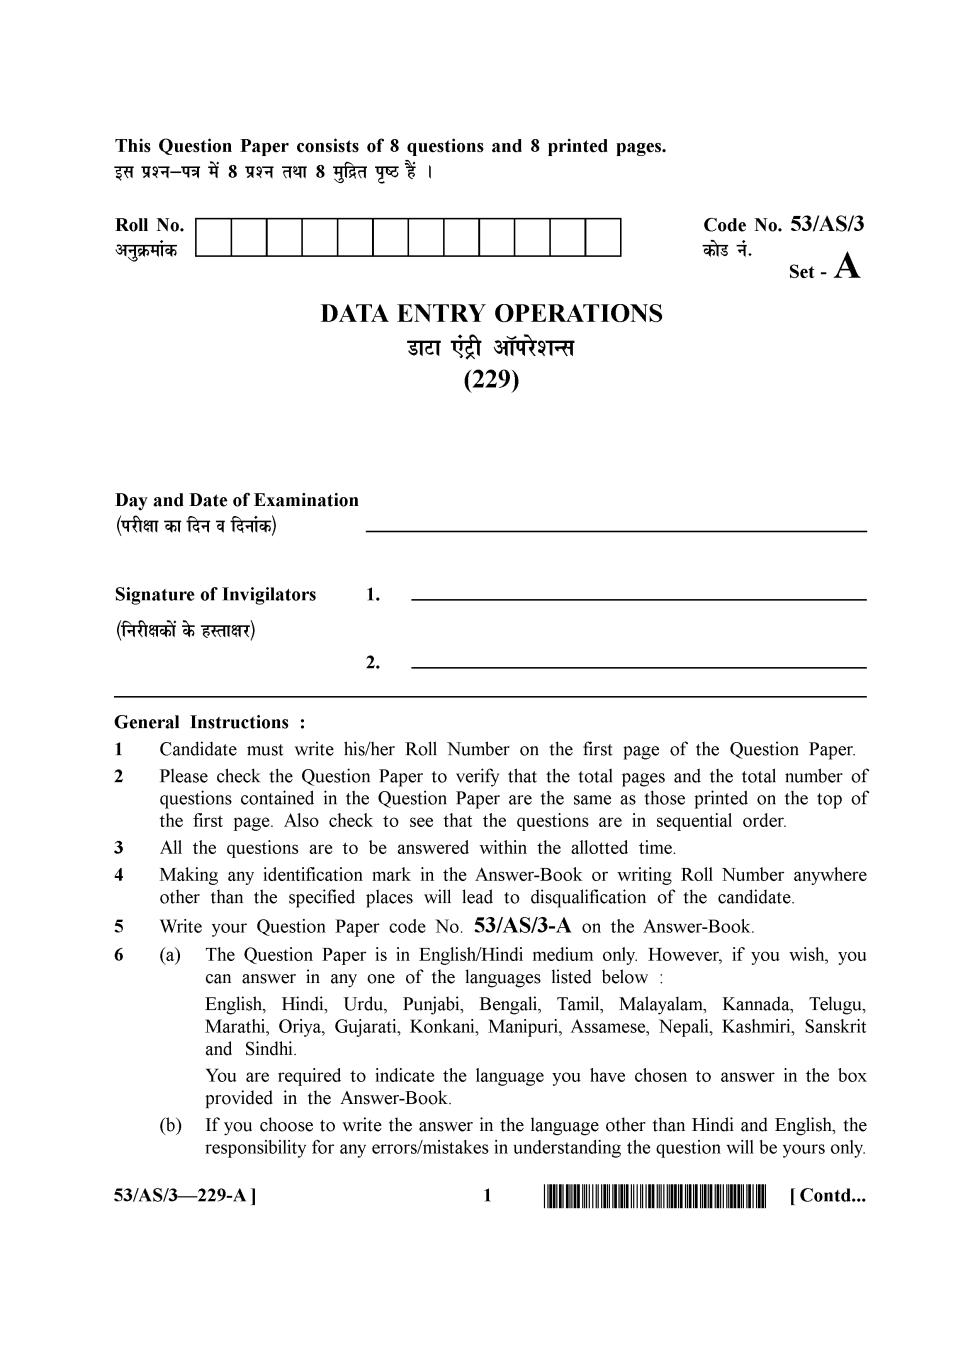 NIOS Class 10 Question Paper Oct 2016 - Data Entry Operations - Page 1